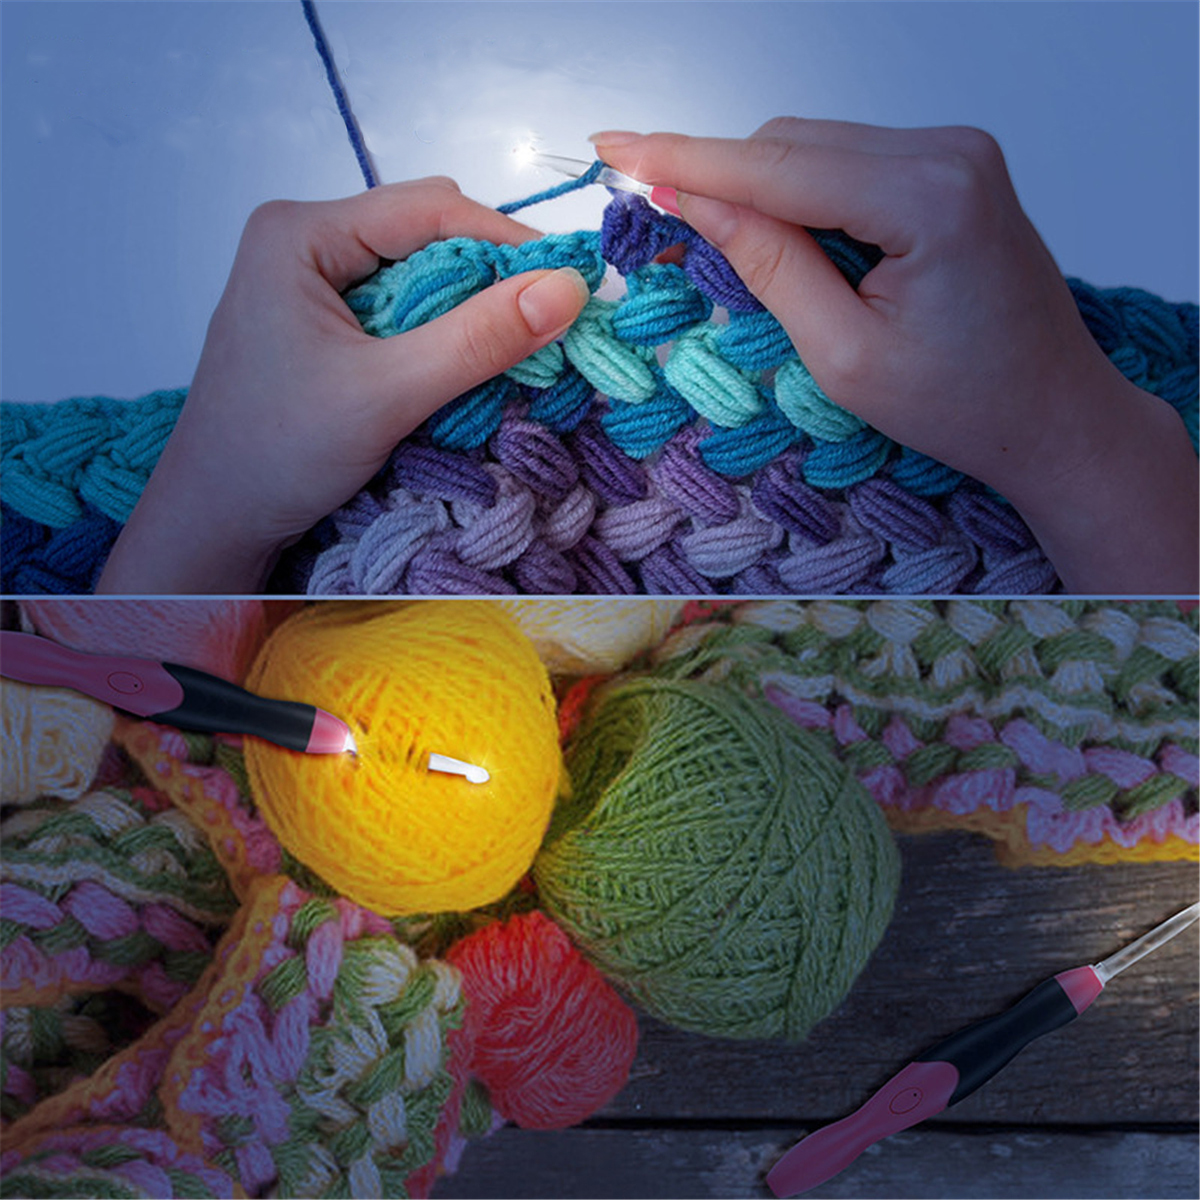 11-In-1-USB-LED-Light-Knitted-Crochet-Kit-DIY-Weaving-Tool-Kits-Sweater-Sewing-Accessories-DIY-LED-F-1586130-4